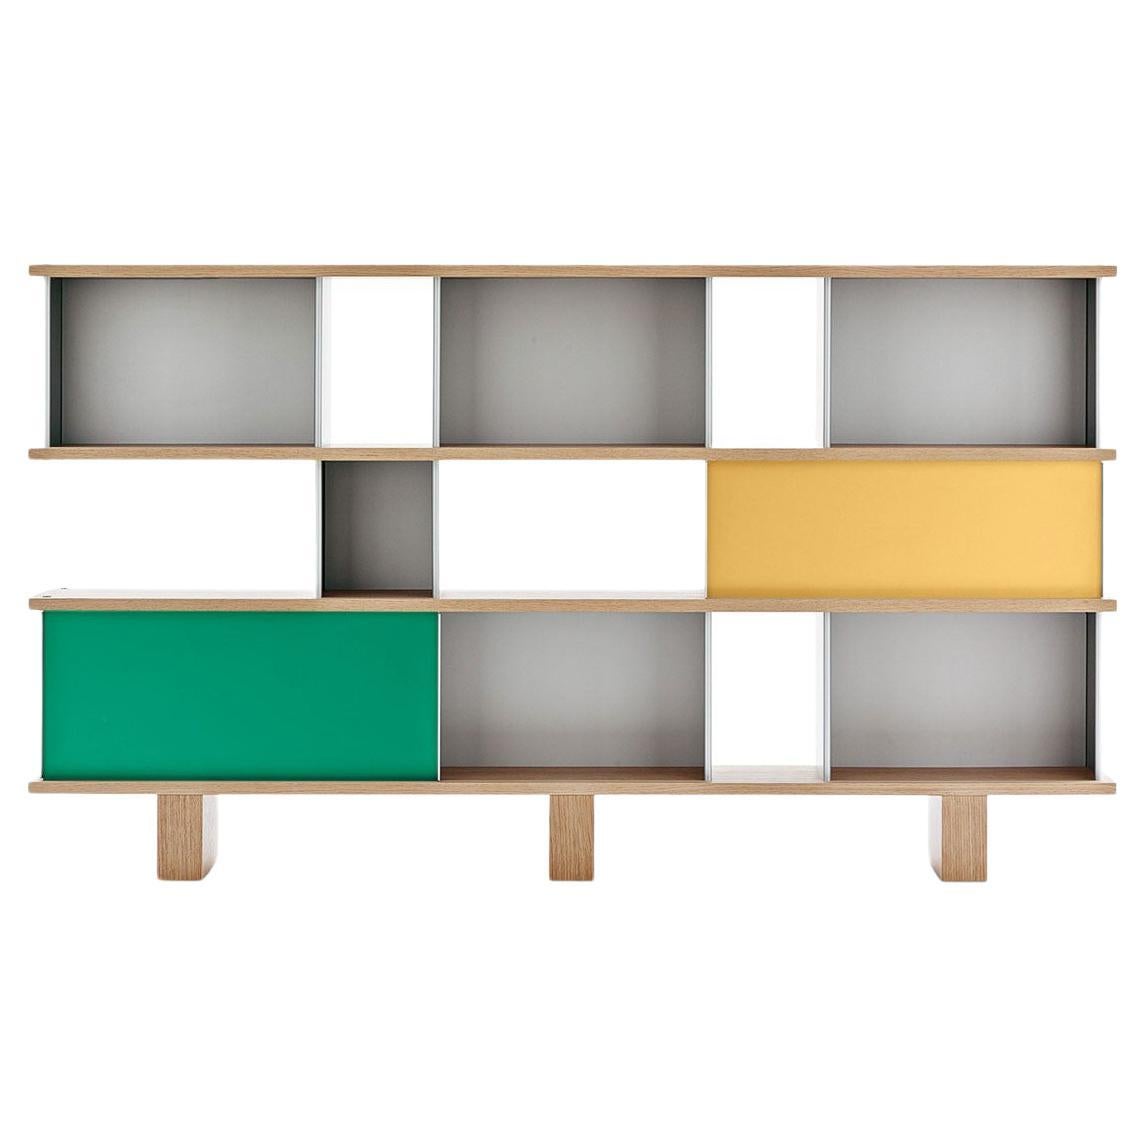 Charlotte Perriand Nuage Shelving Unit, Wood and Aluminium by Cassina For Sale